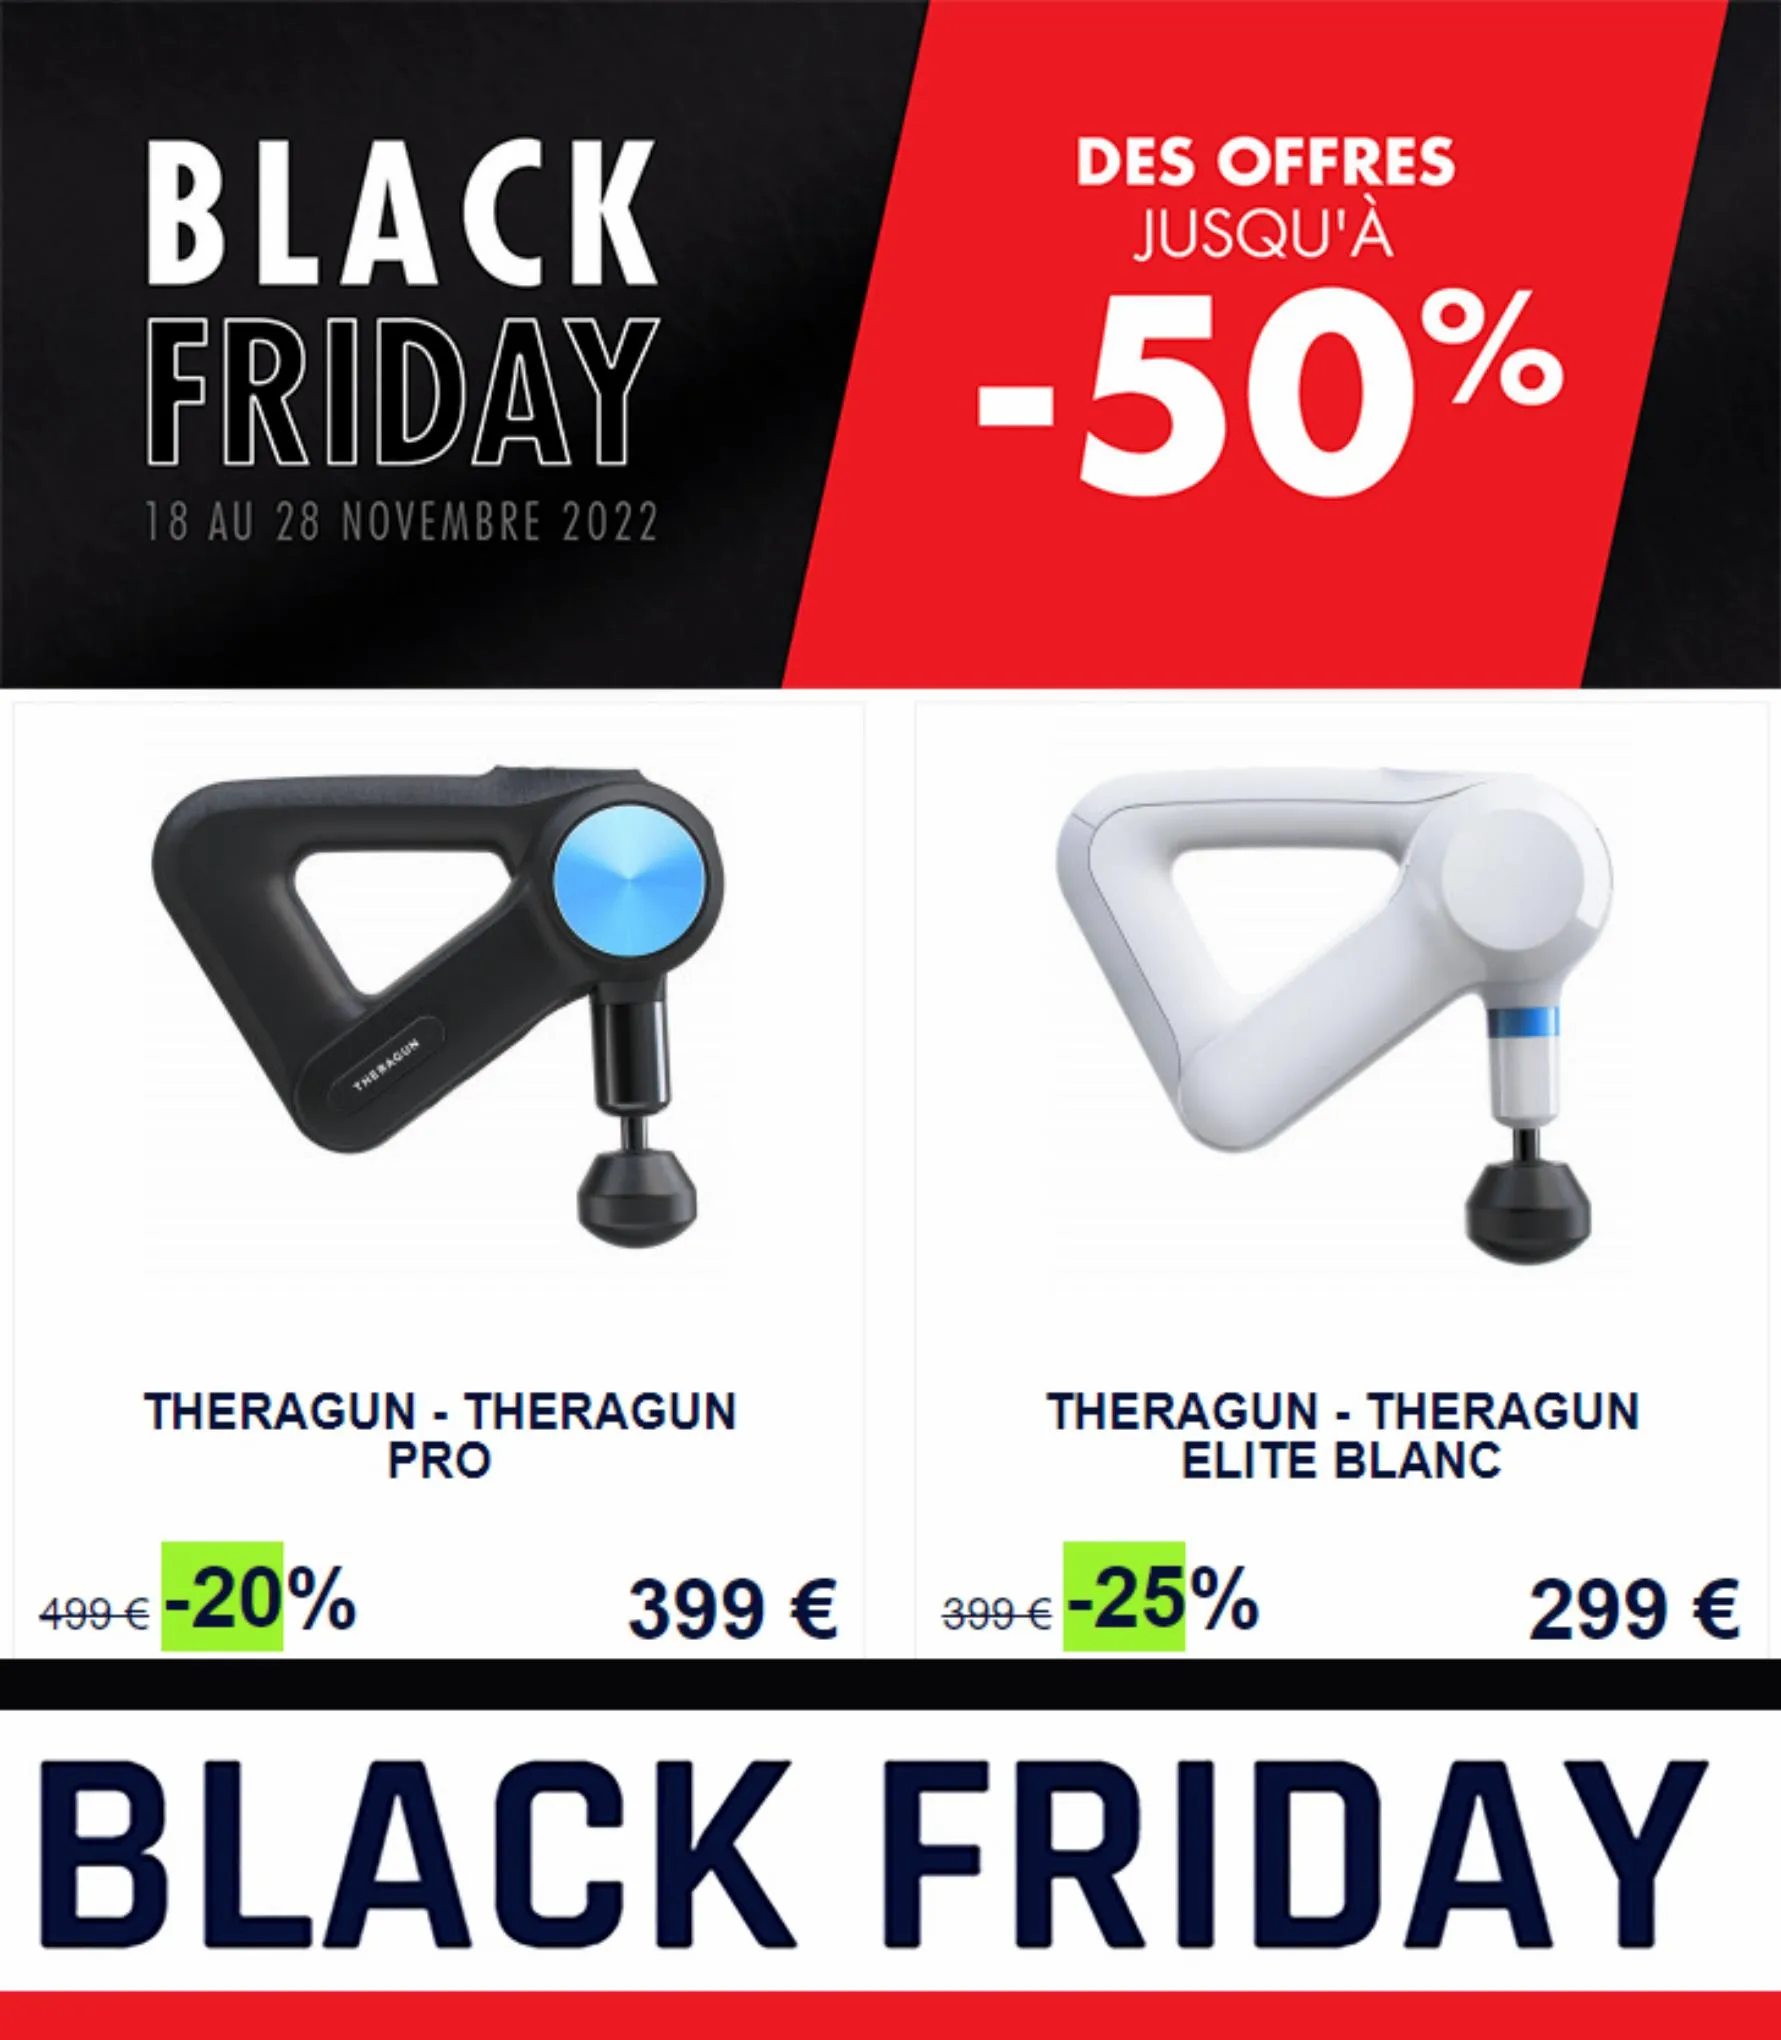 Catalogue Black Friday Offers -50%!, page 00002